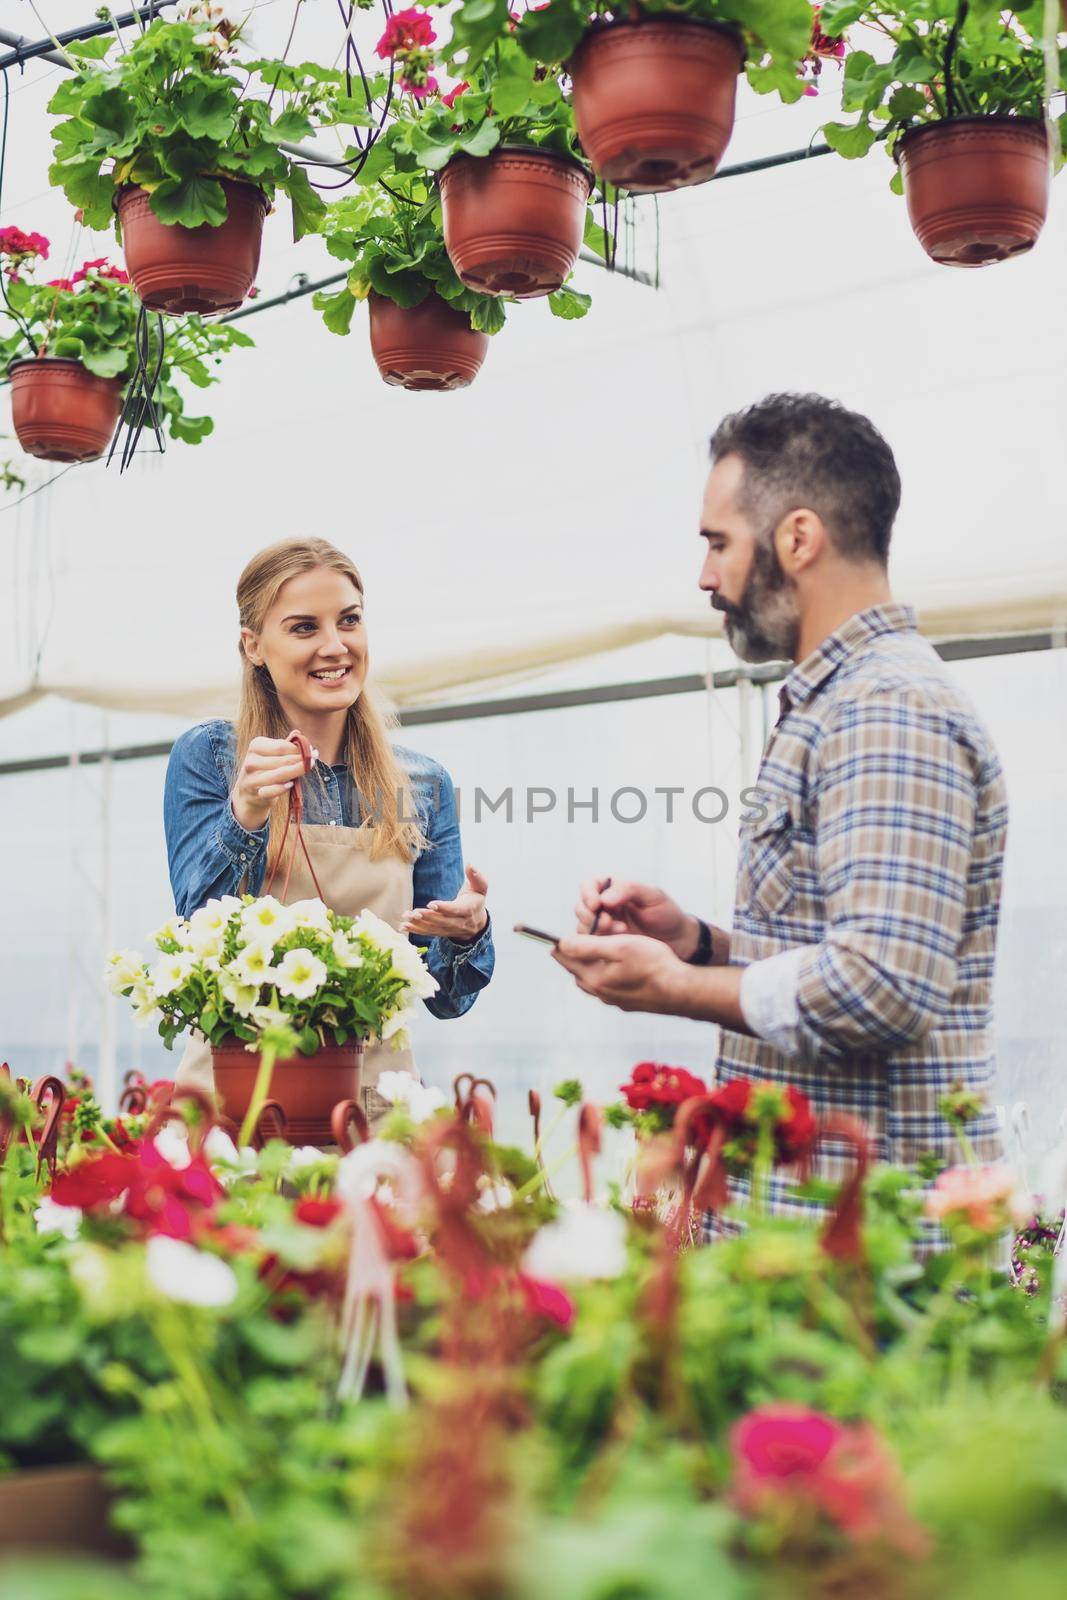 Couple is owning small business greenhouse store. They are examining plants.